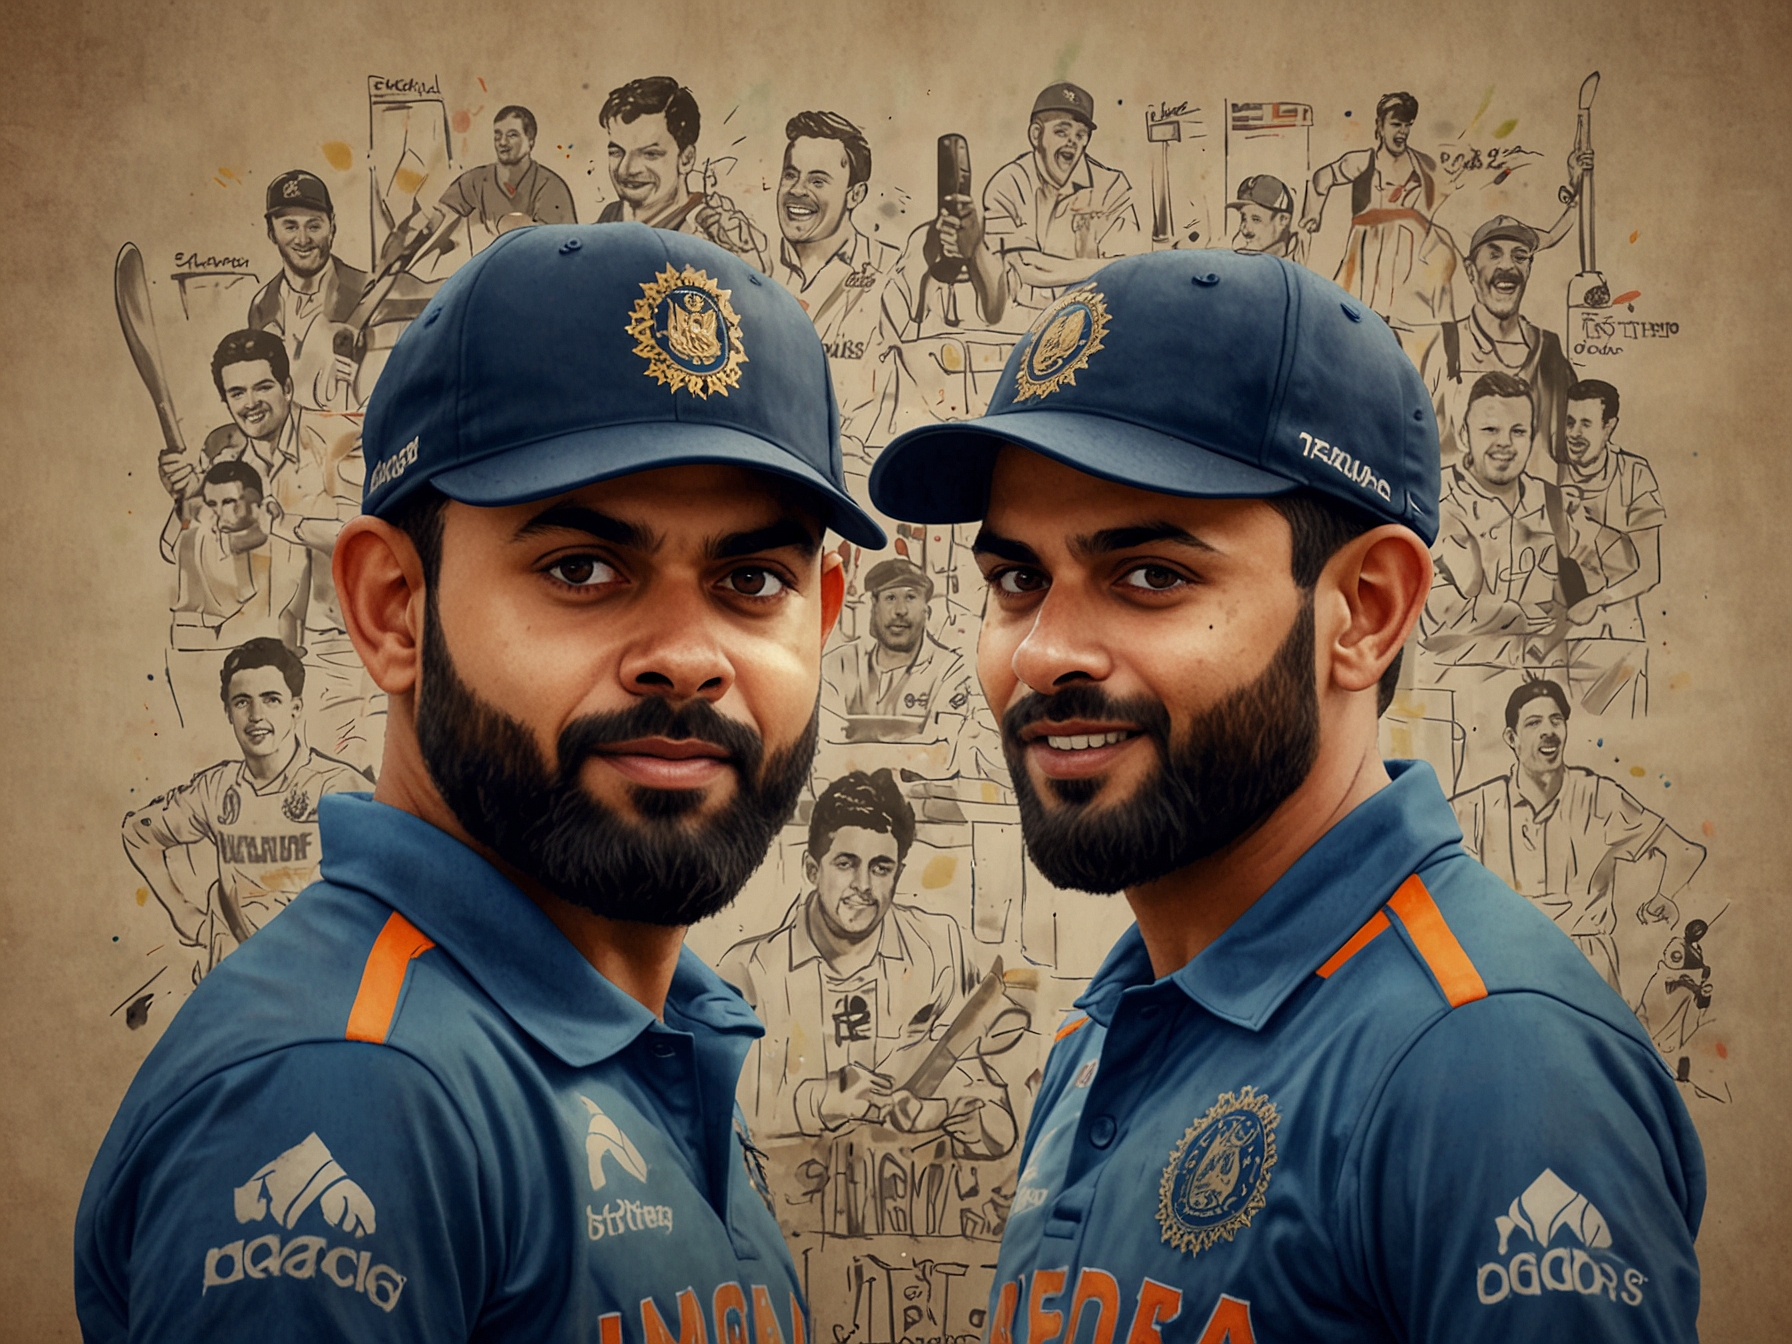 A collage highlighting key players like Virat Kohli and Jos Buttler, accompanied by humorous and competitive social media memes, capturing the global excitement and rivalry preceding the anticipated semi-final clash.